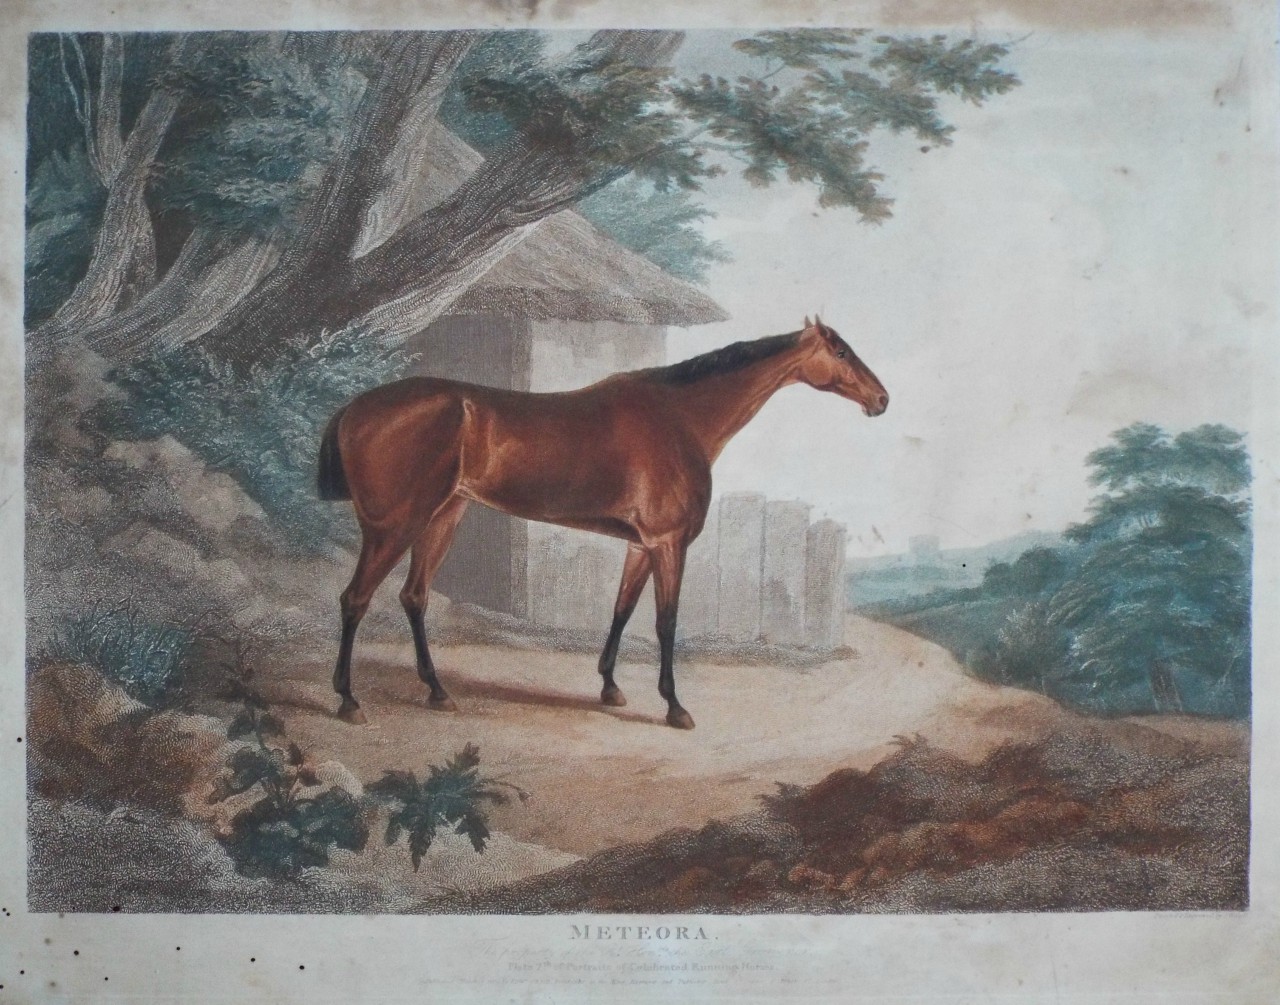 Stipple - Meteora. The property of the Rt. Honble. the Earl Grosvenor. Plate 7th of Celebrated Running Horses. - Whessell